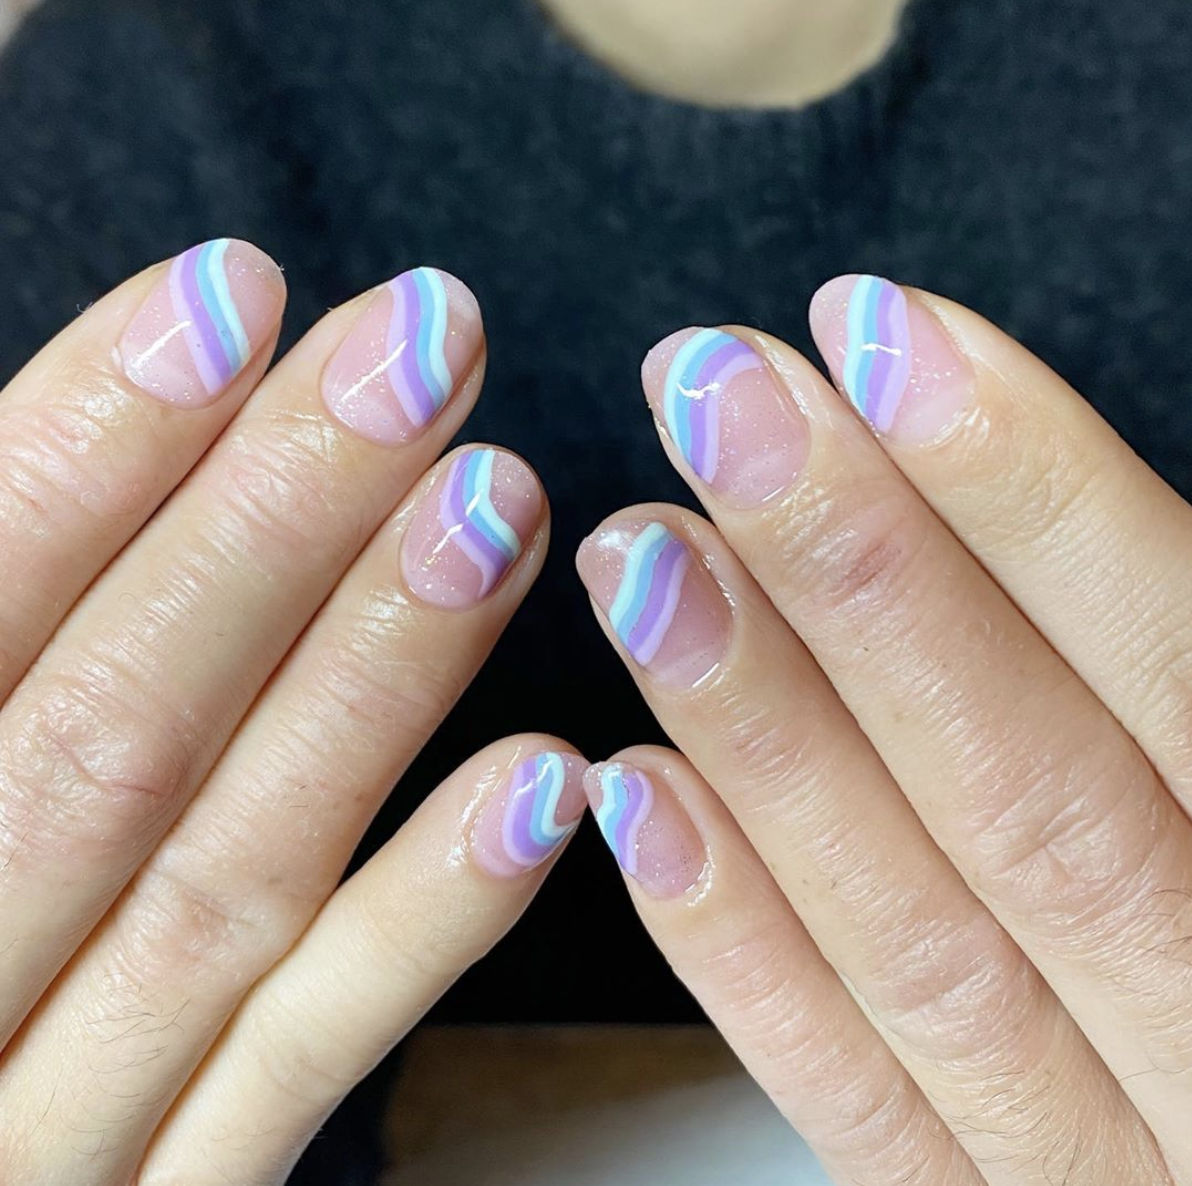 8 Cool Nail Art Designs to Try Right Now